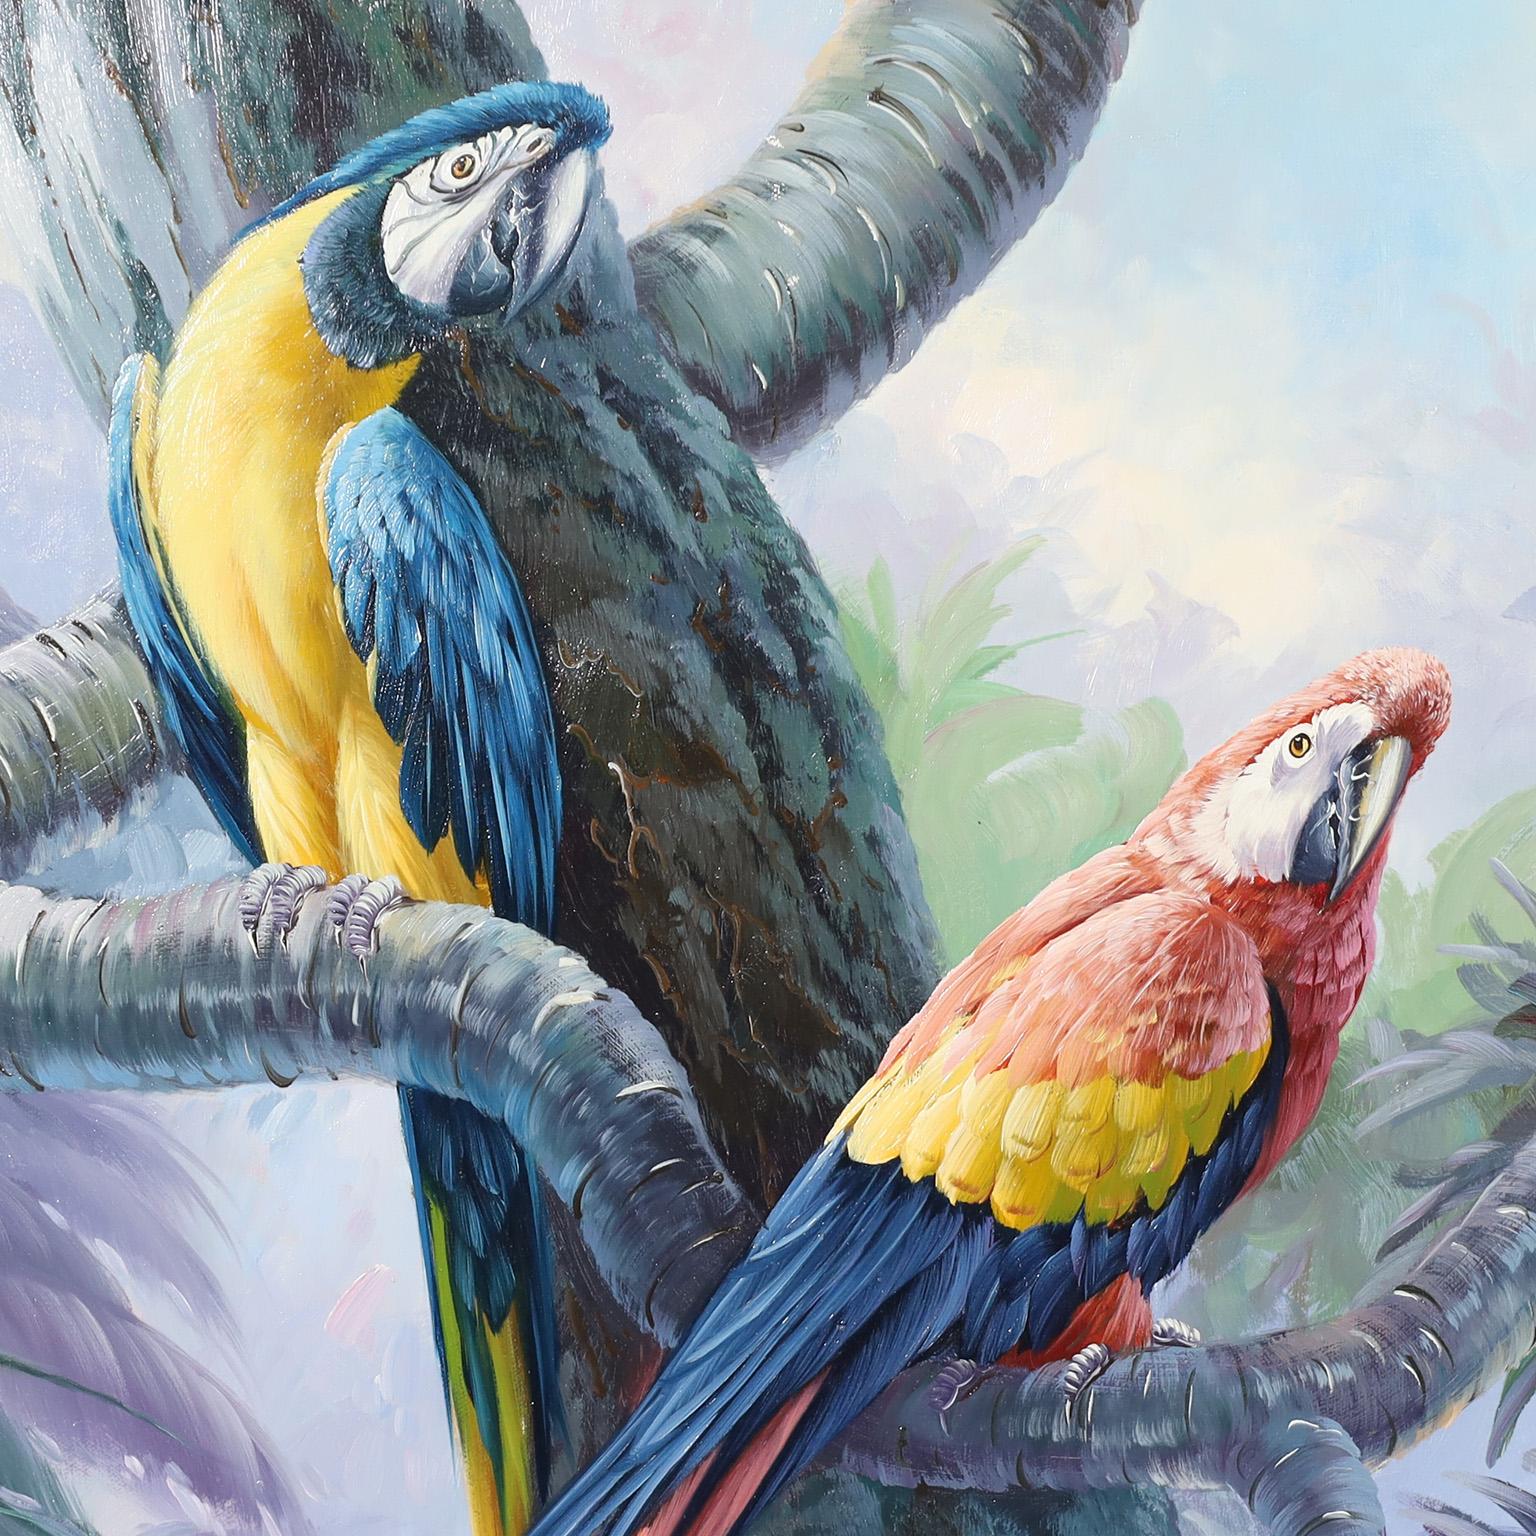 Oil Painting on Canvas of Parrots - Gray Animal Painting by Unknown